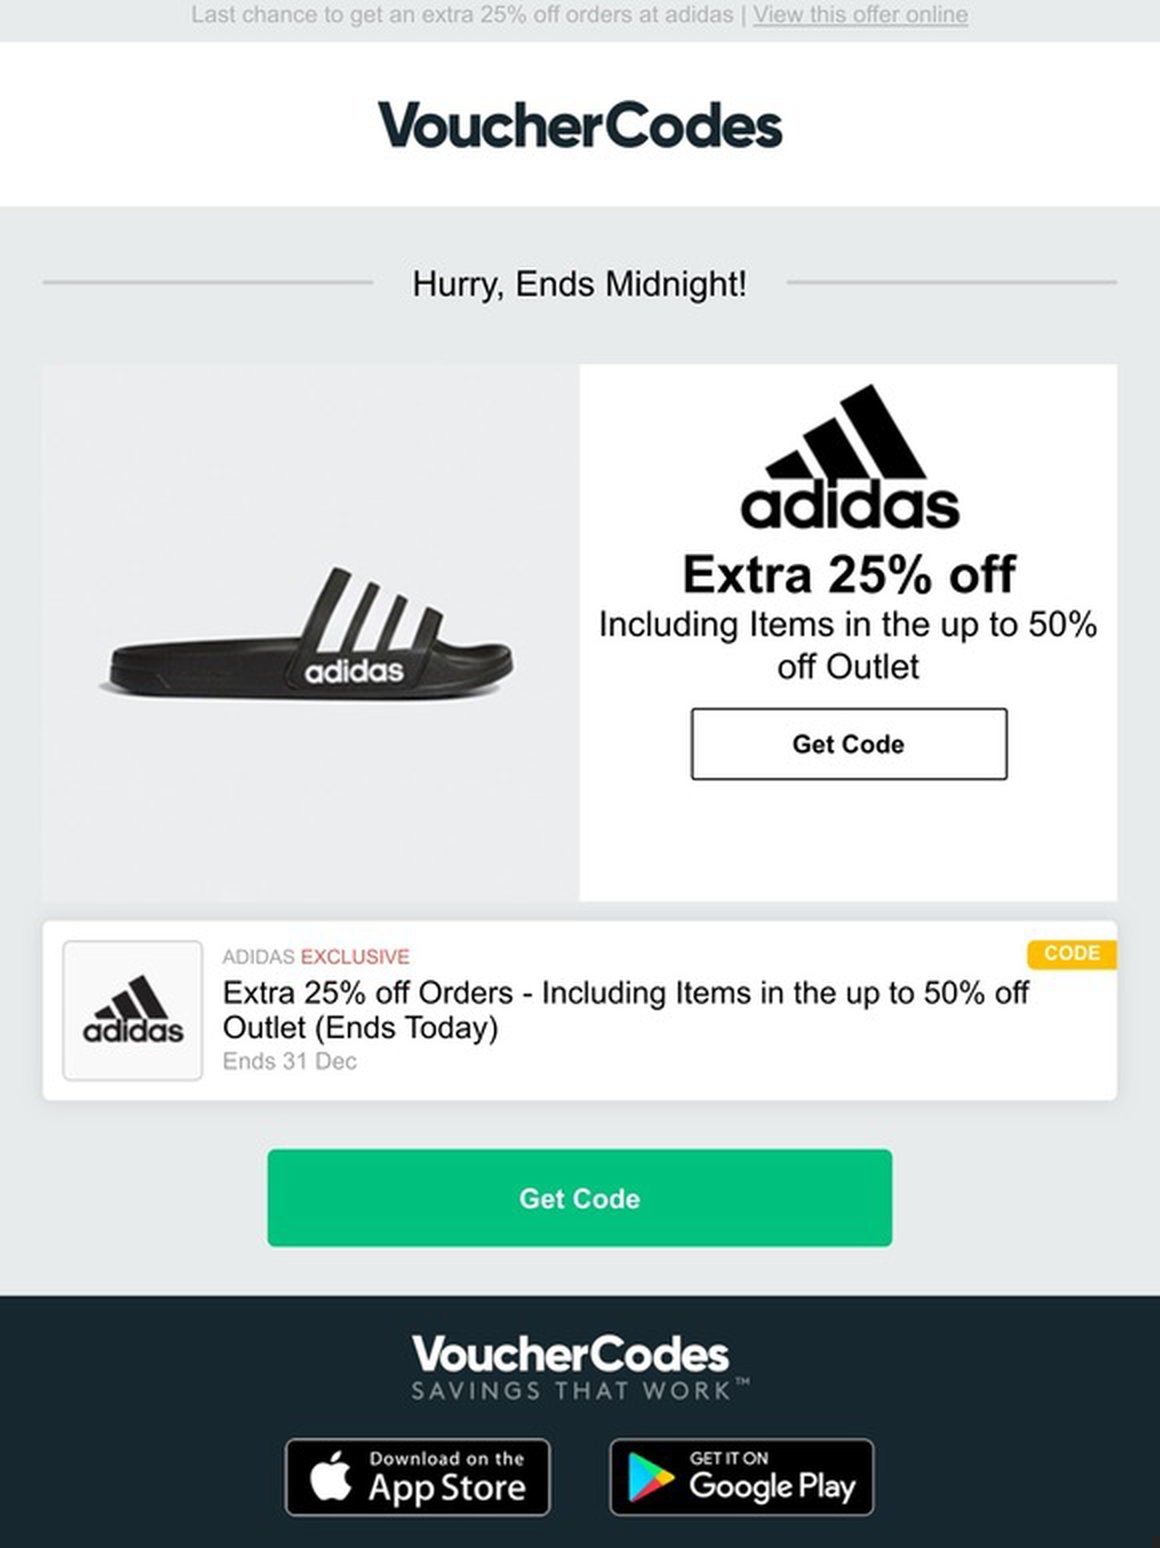 vouchercodes.co.uk: adidas - Extra 25% off - Ends Midnight! | Milled